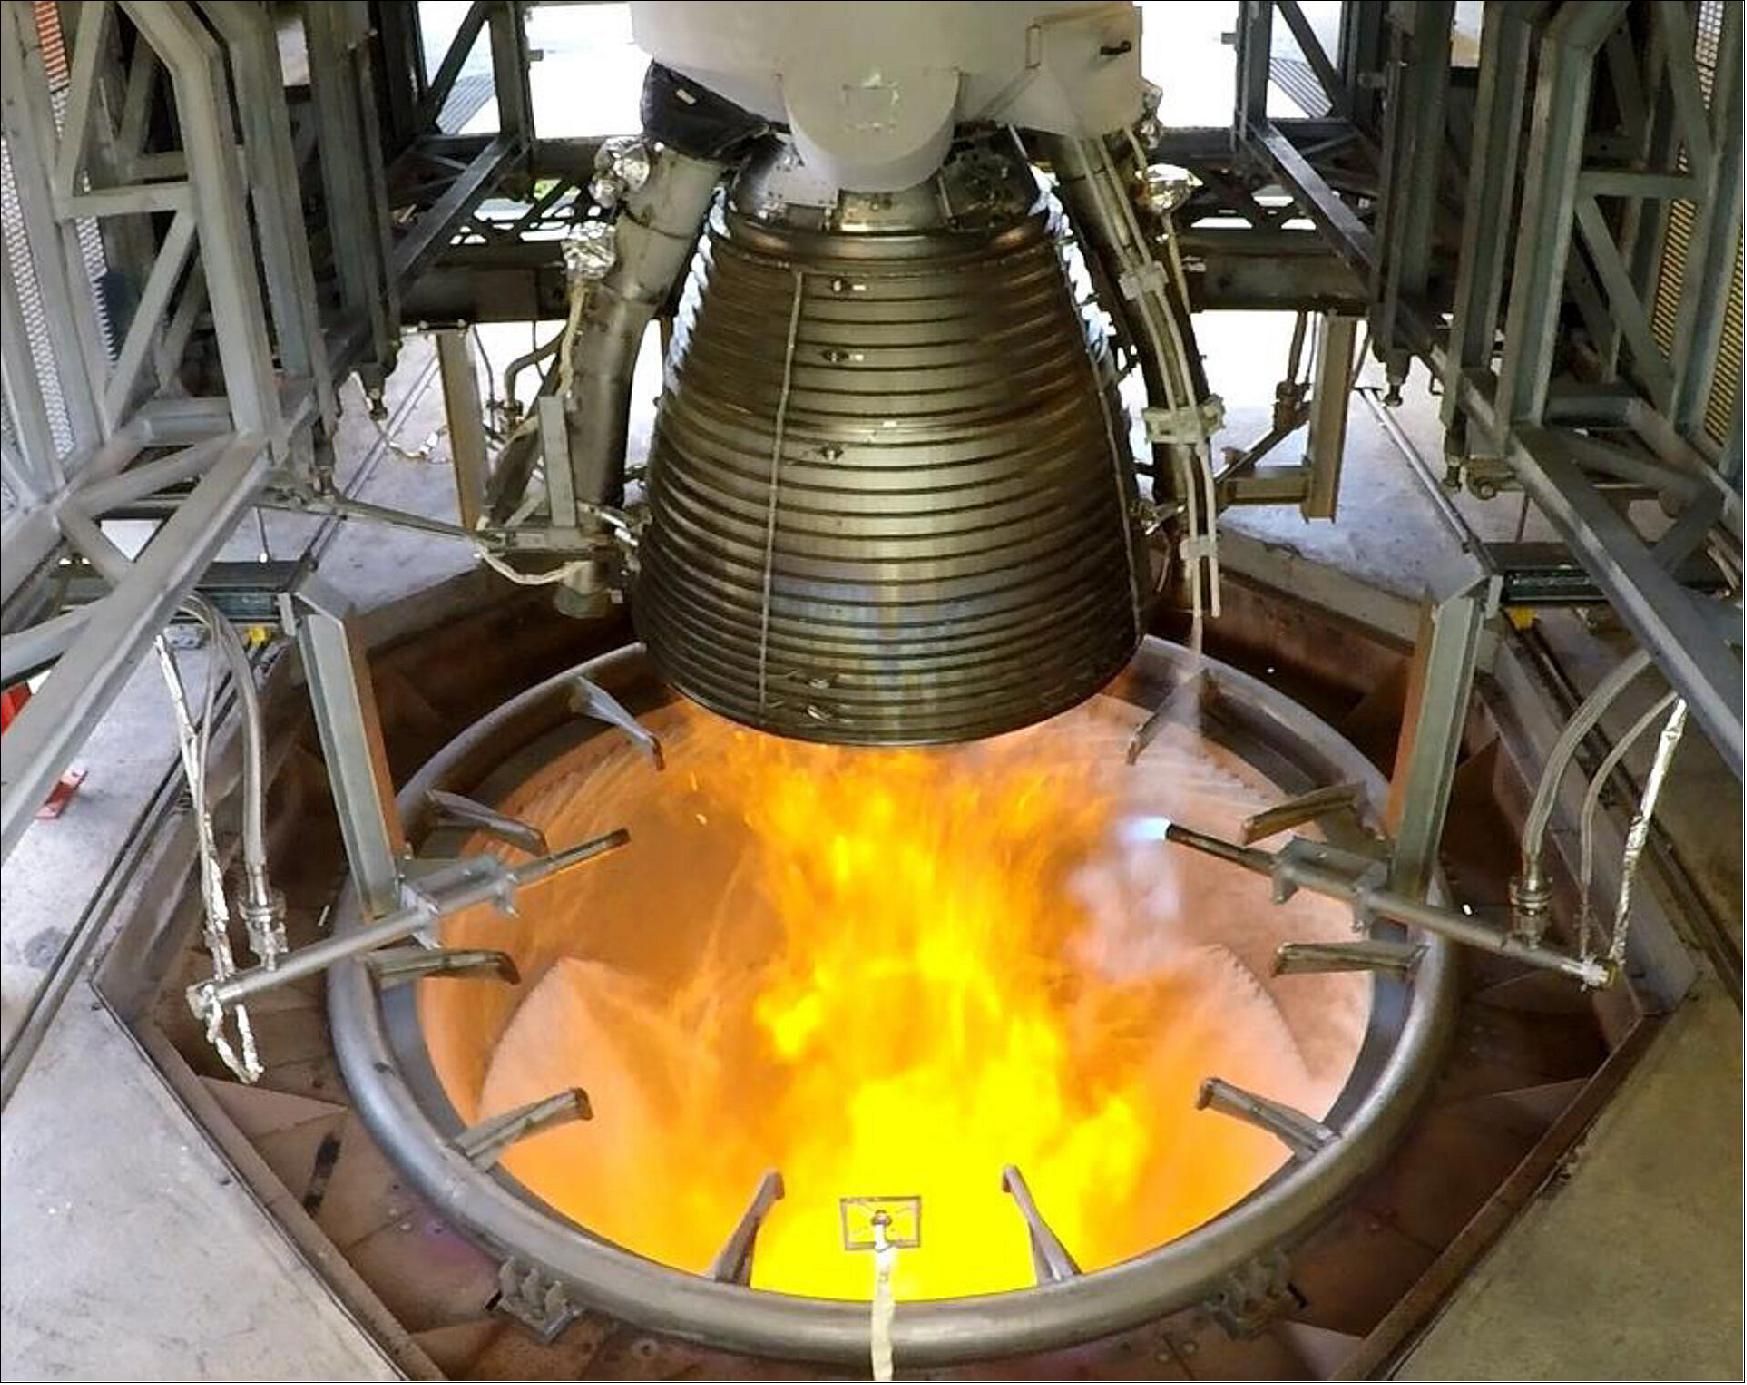 Figure 51: Vulcain 2.1 static firing test. The main stage Vulcain 2.1 engine will deliver 135 t of thrust to propel Ariane 6 in the first eight minutes of flight up to an altitude of 200 km. A review in September 2019 marked the culmination of two Vulcain static firing test campaigns over 15 months on two demonstration models in test facilities at the DLR German Aerospace Center test facility in Lampoldshausen. The final qualification static firing test of Vulcain 2.1 in July lasted almost 11 minutes (655 seconds). This completed a total of 13,798 seconds of operation, or nearly four hours with a controlled engine, using Ariane 6 flight actuators to gimbal the engine. The engine will be refurbished for dynamic and vibration tests. Combined tests using a fully representative main stage at Europe’s Spaceport in French Guiana, will finally qualify the Ariane 6 core stage for flight (image credit: ArianeGroup)